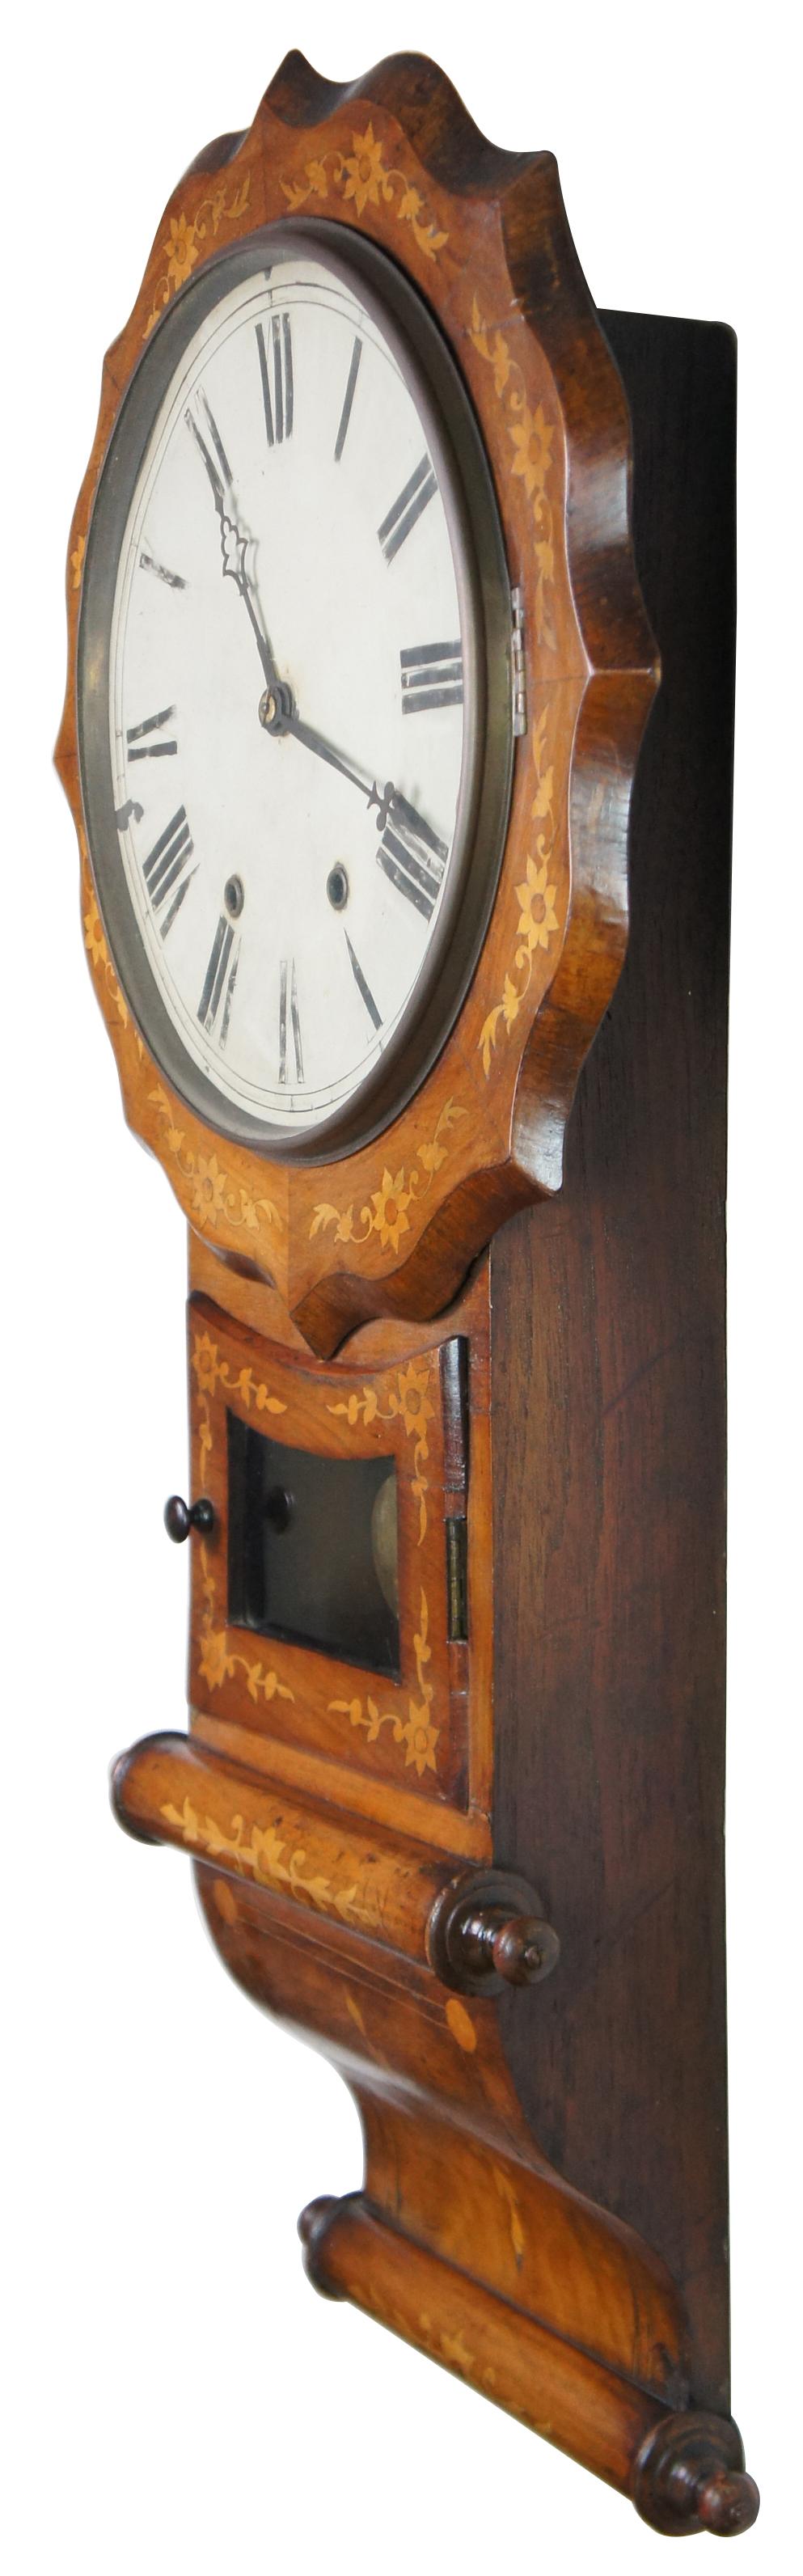 Antique 19th century Anglo American drop dial wall clock. The hand-crafted case being made in England, and the movement being imported from the Us Made of walnut and inlaid satinwood / fruitwood featuring scalloped form with a starburst / sunburst